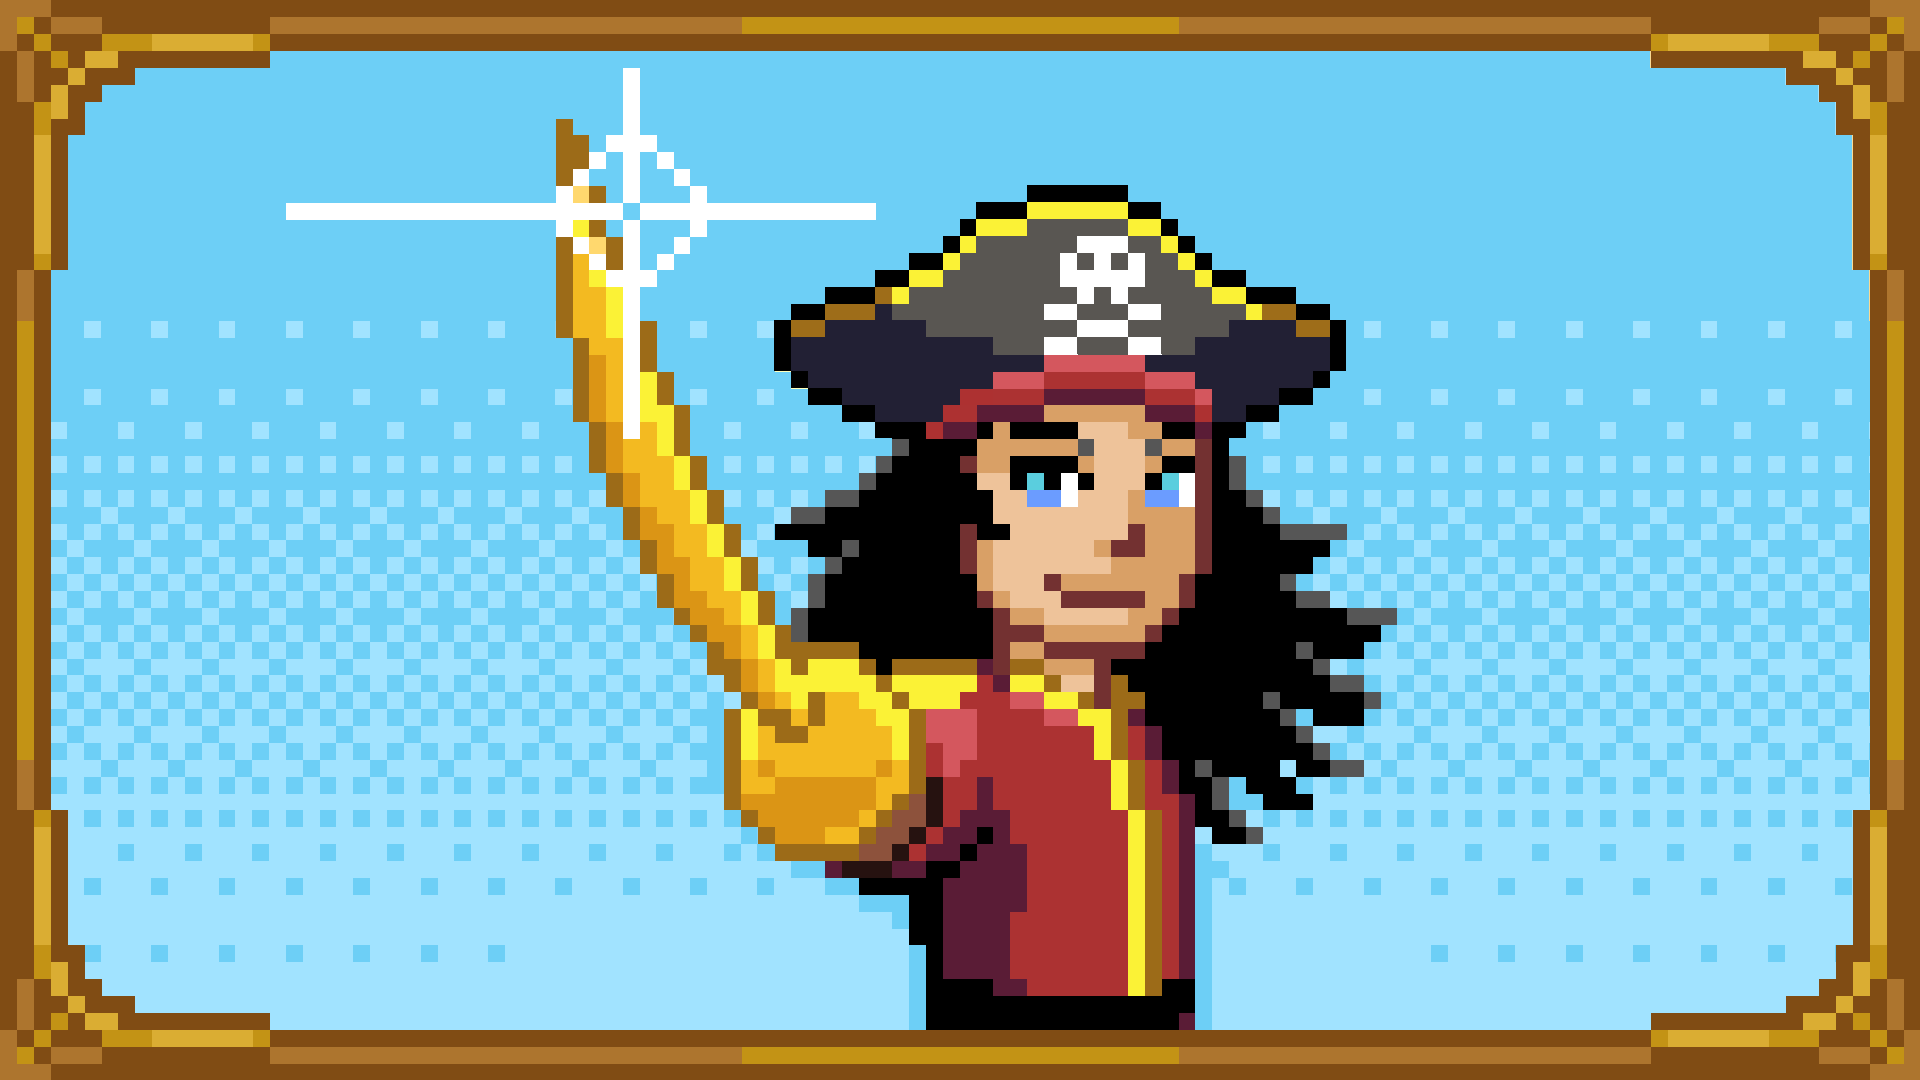 Icon for I'm the Captain Now